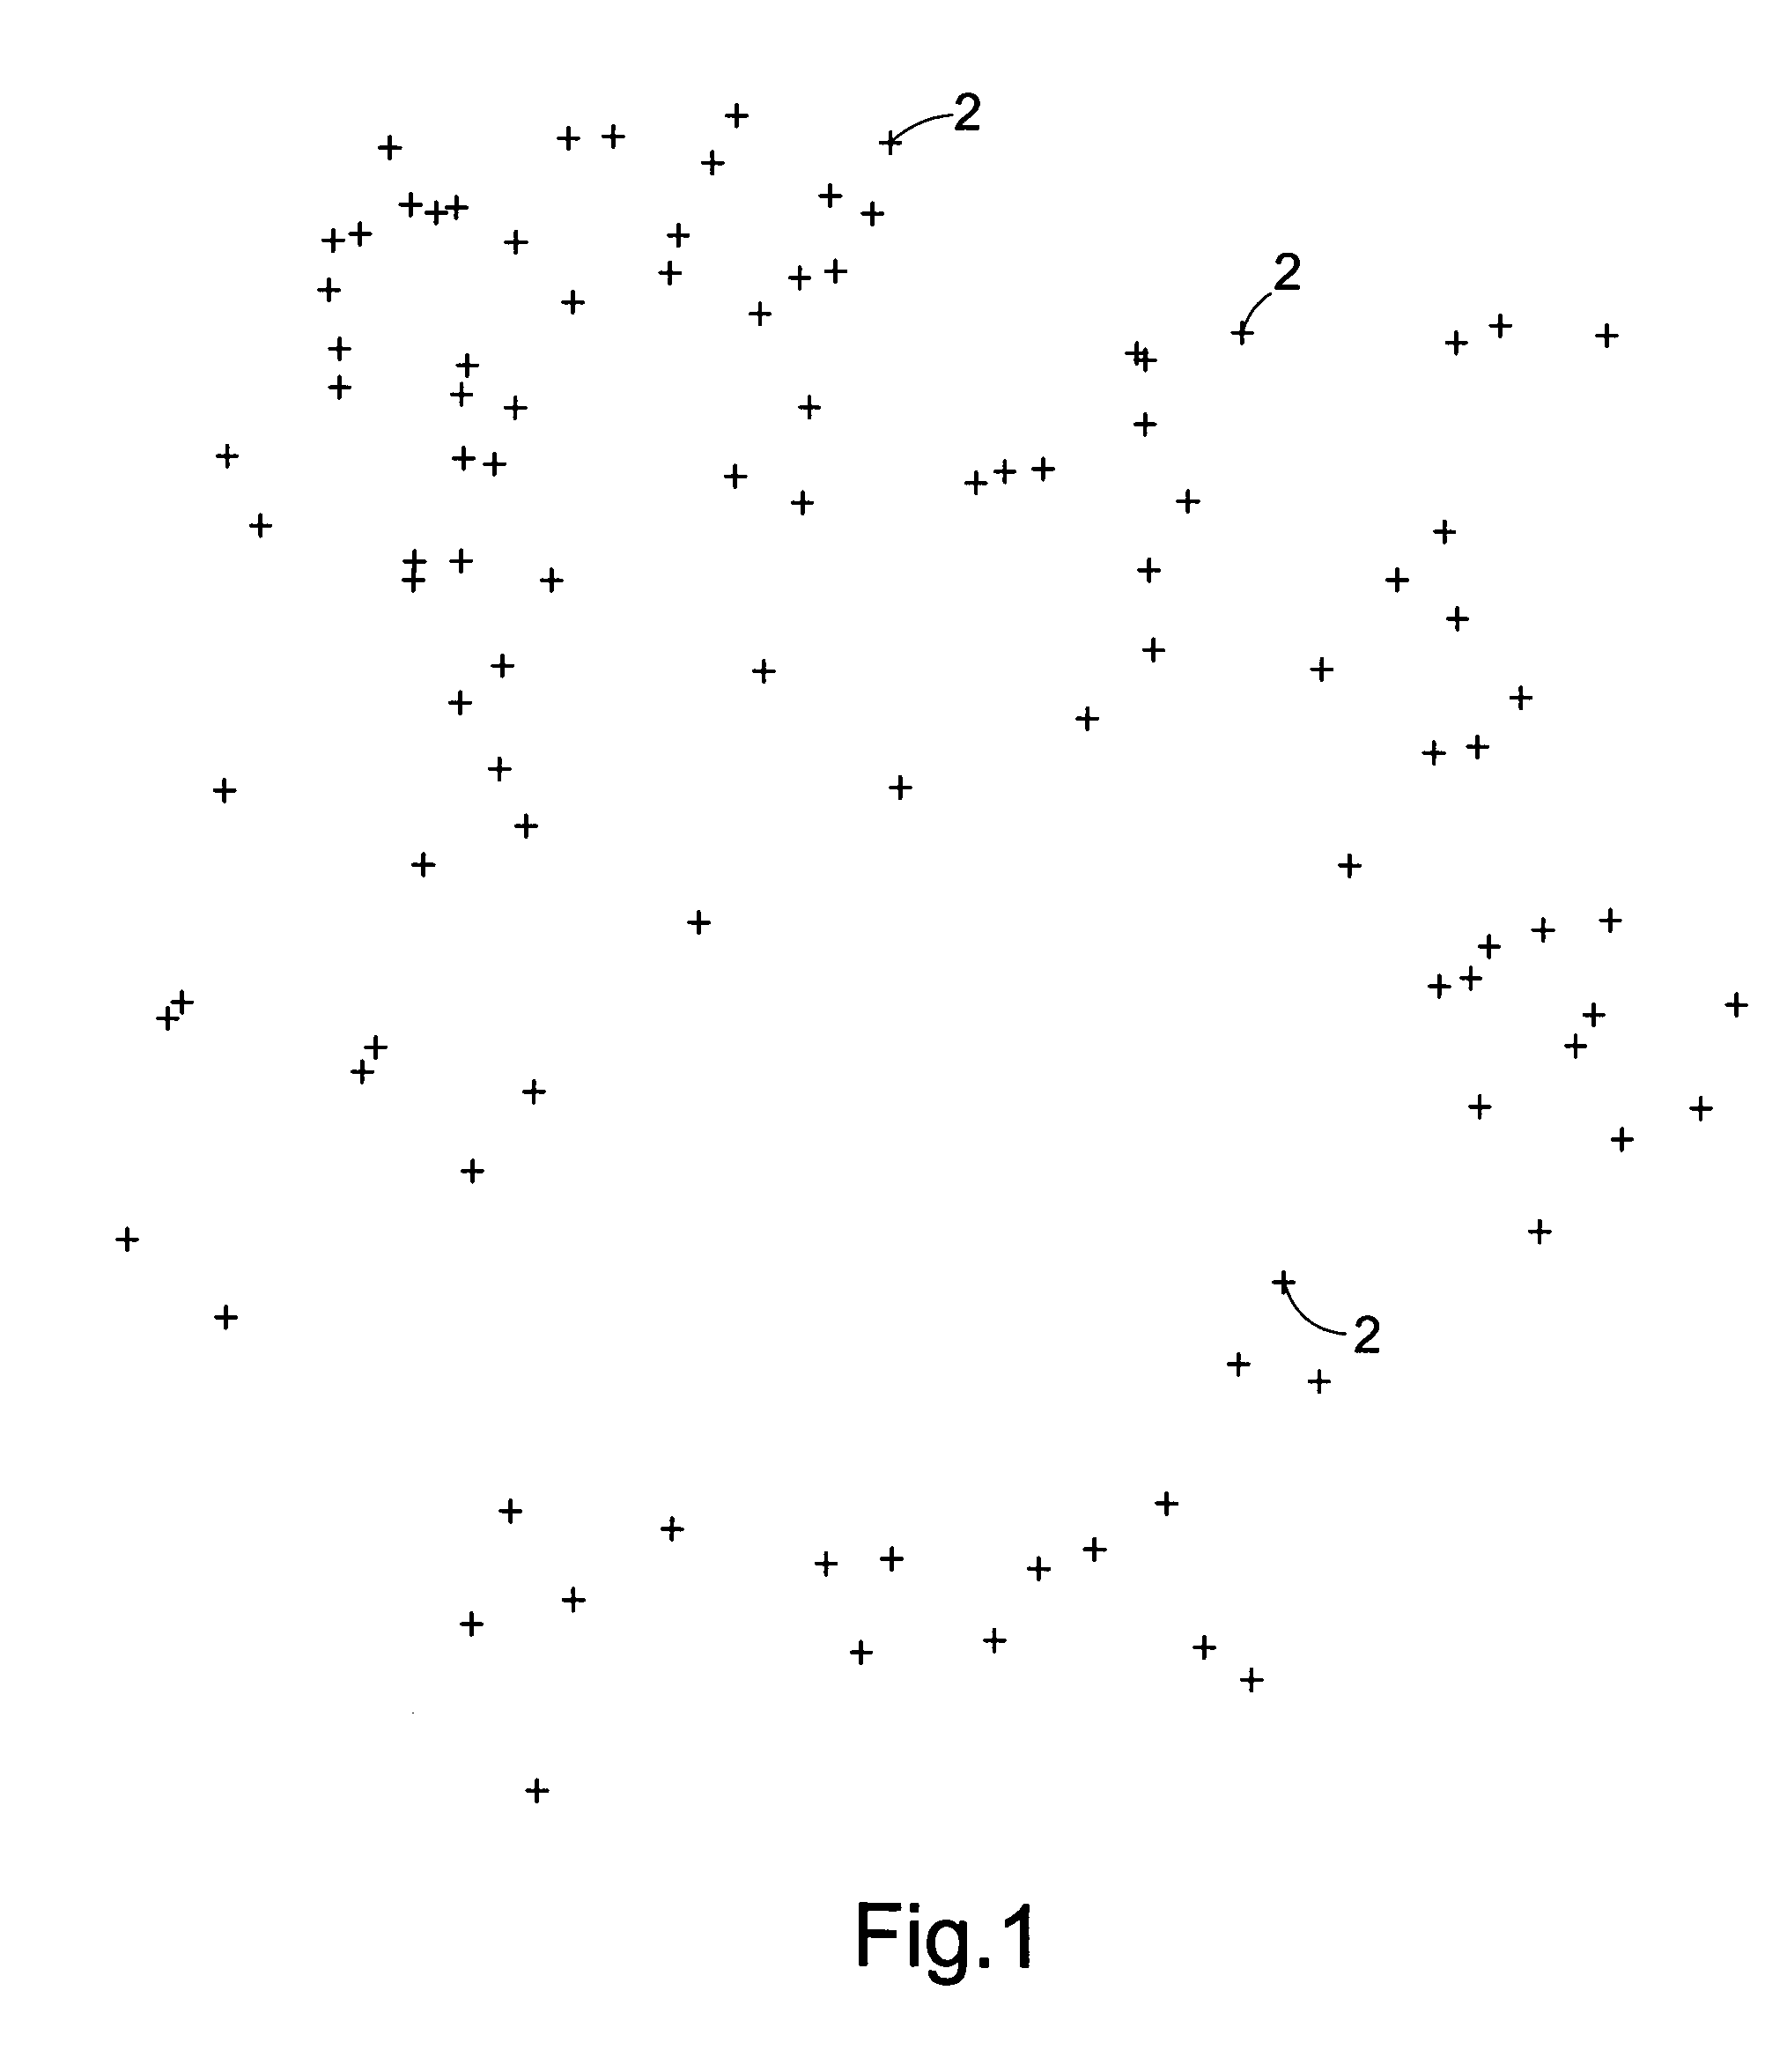 Method of and apparatus for generating a model of a cardiac surface having a plurality of images representing electrogram voltages